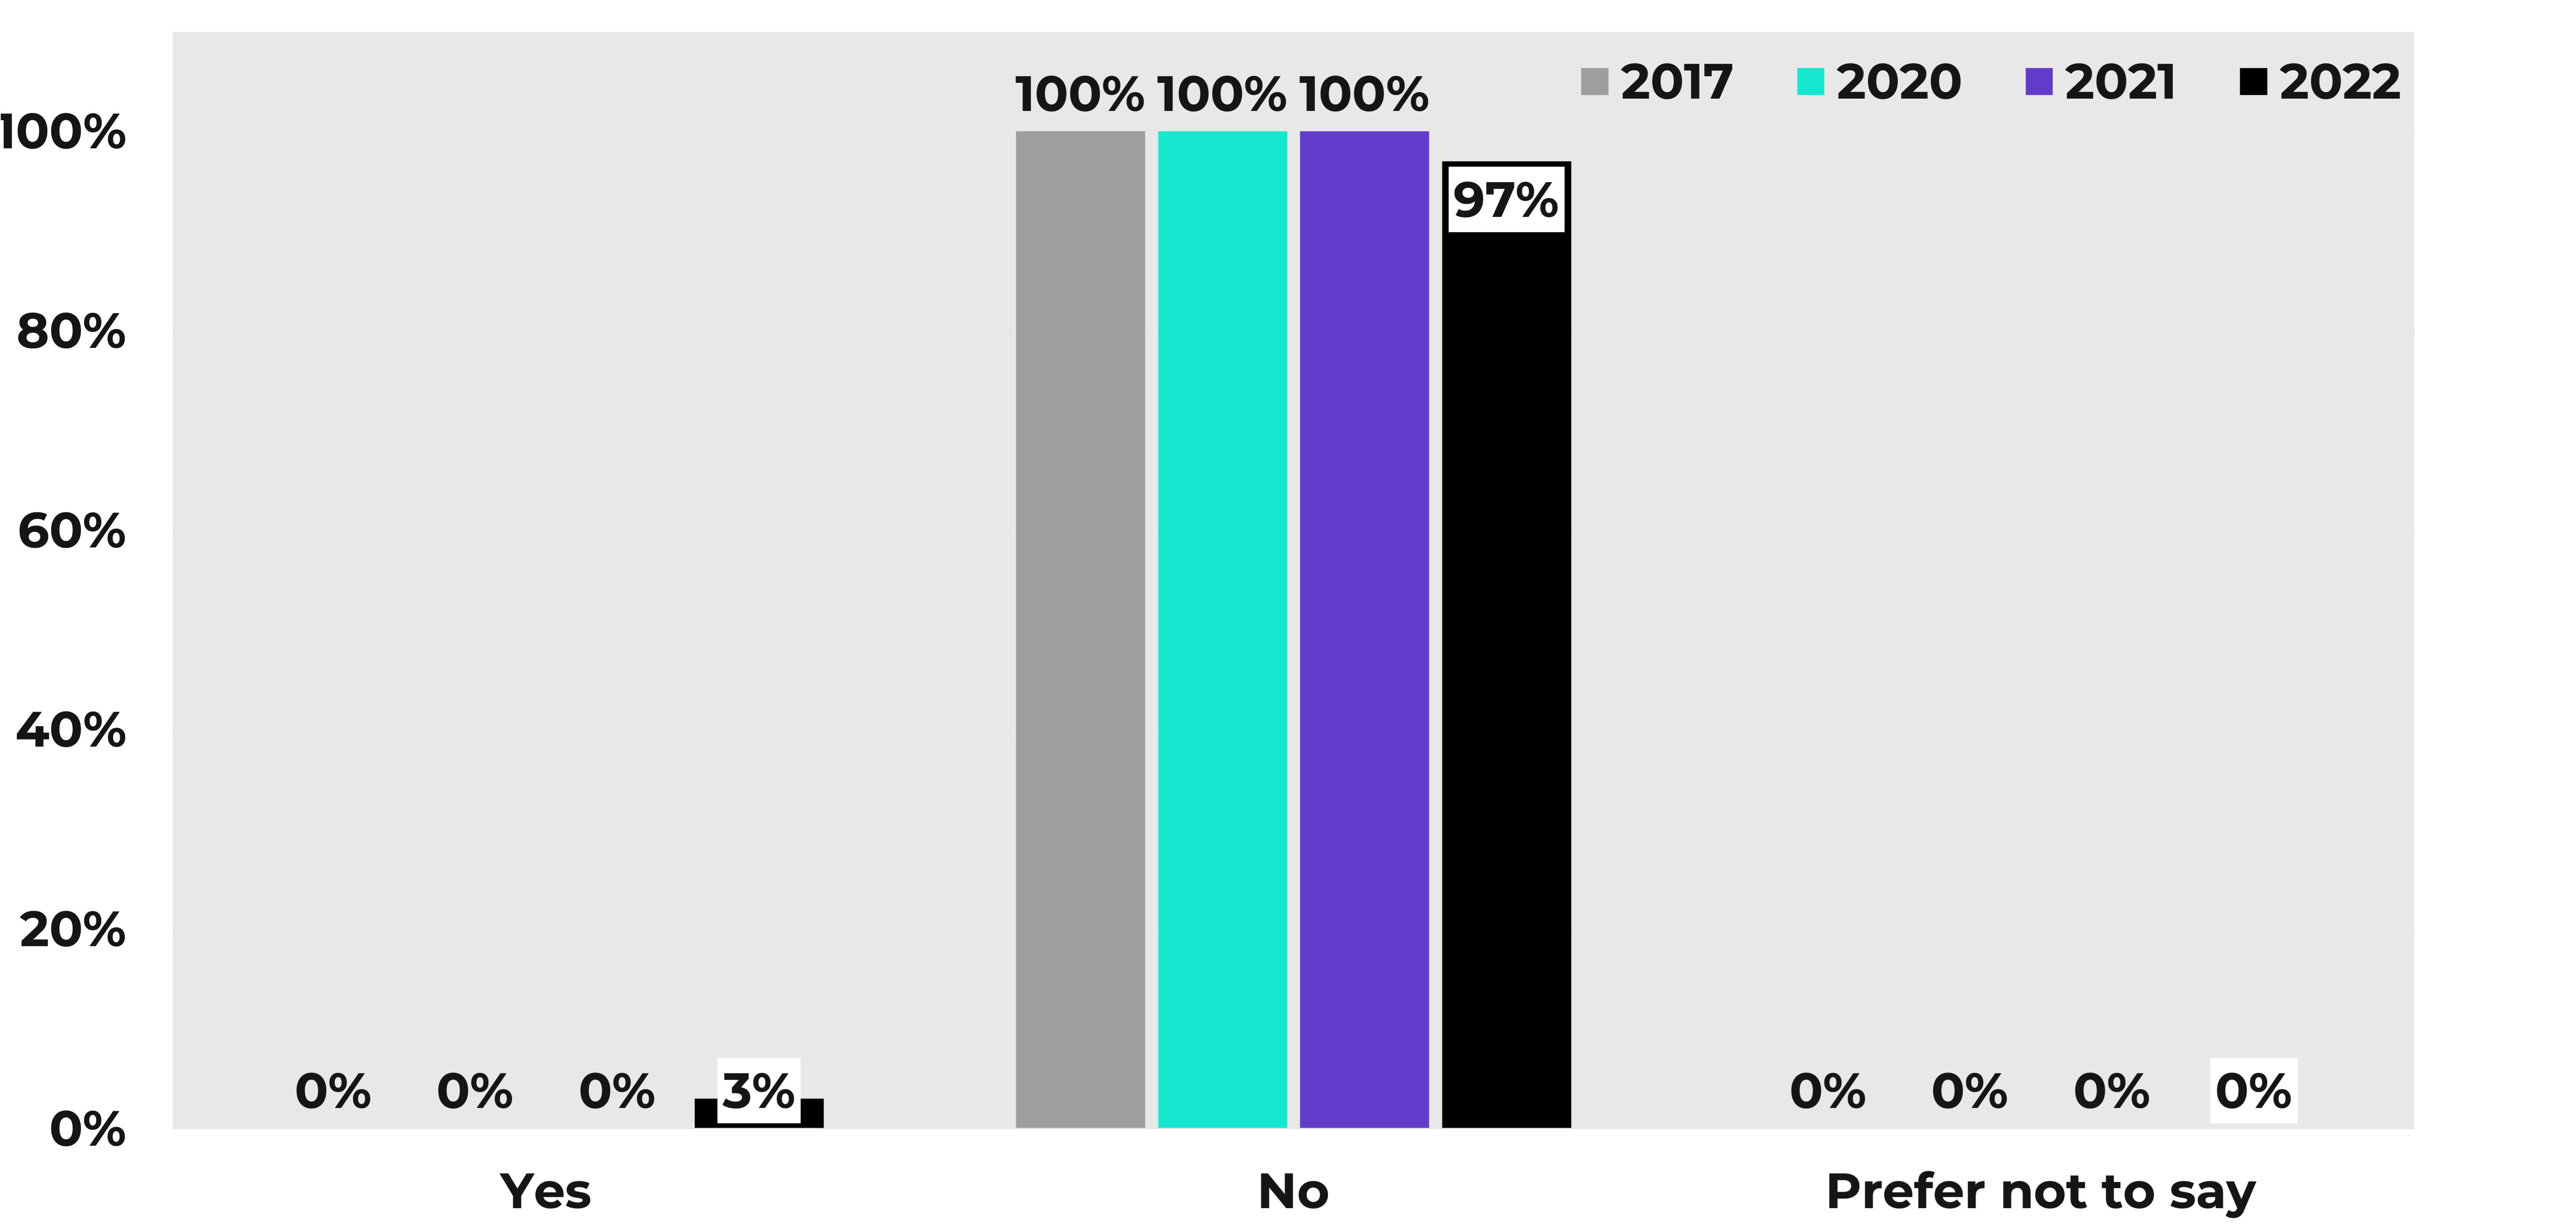 A bar chart displaying trans representation in the Youth Music team from 2017 to 2022.